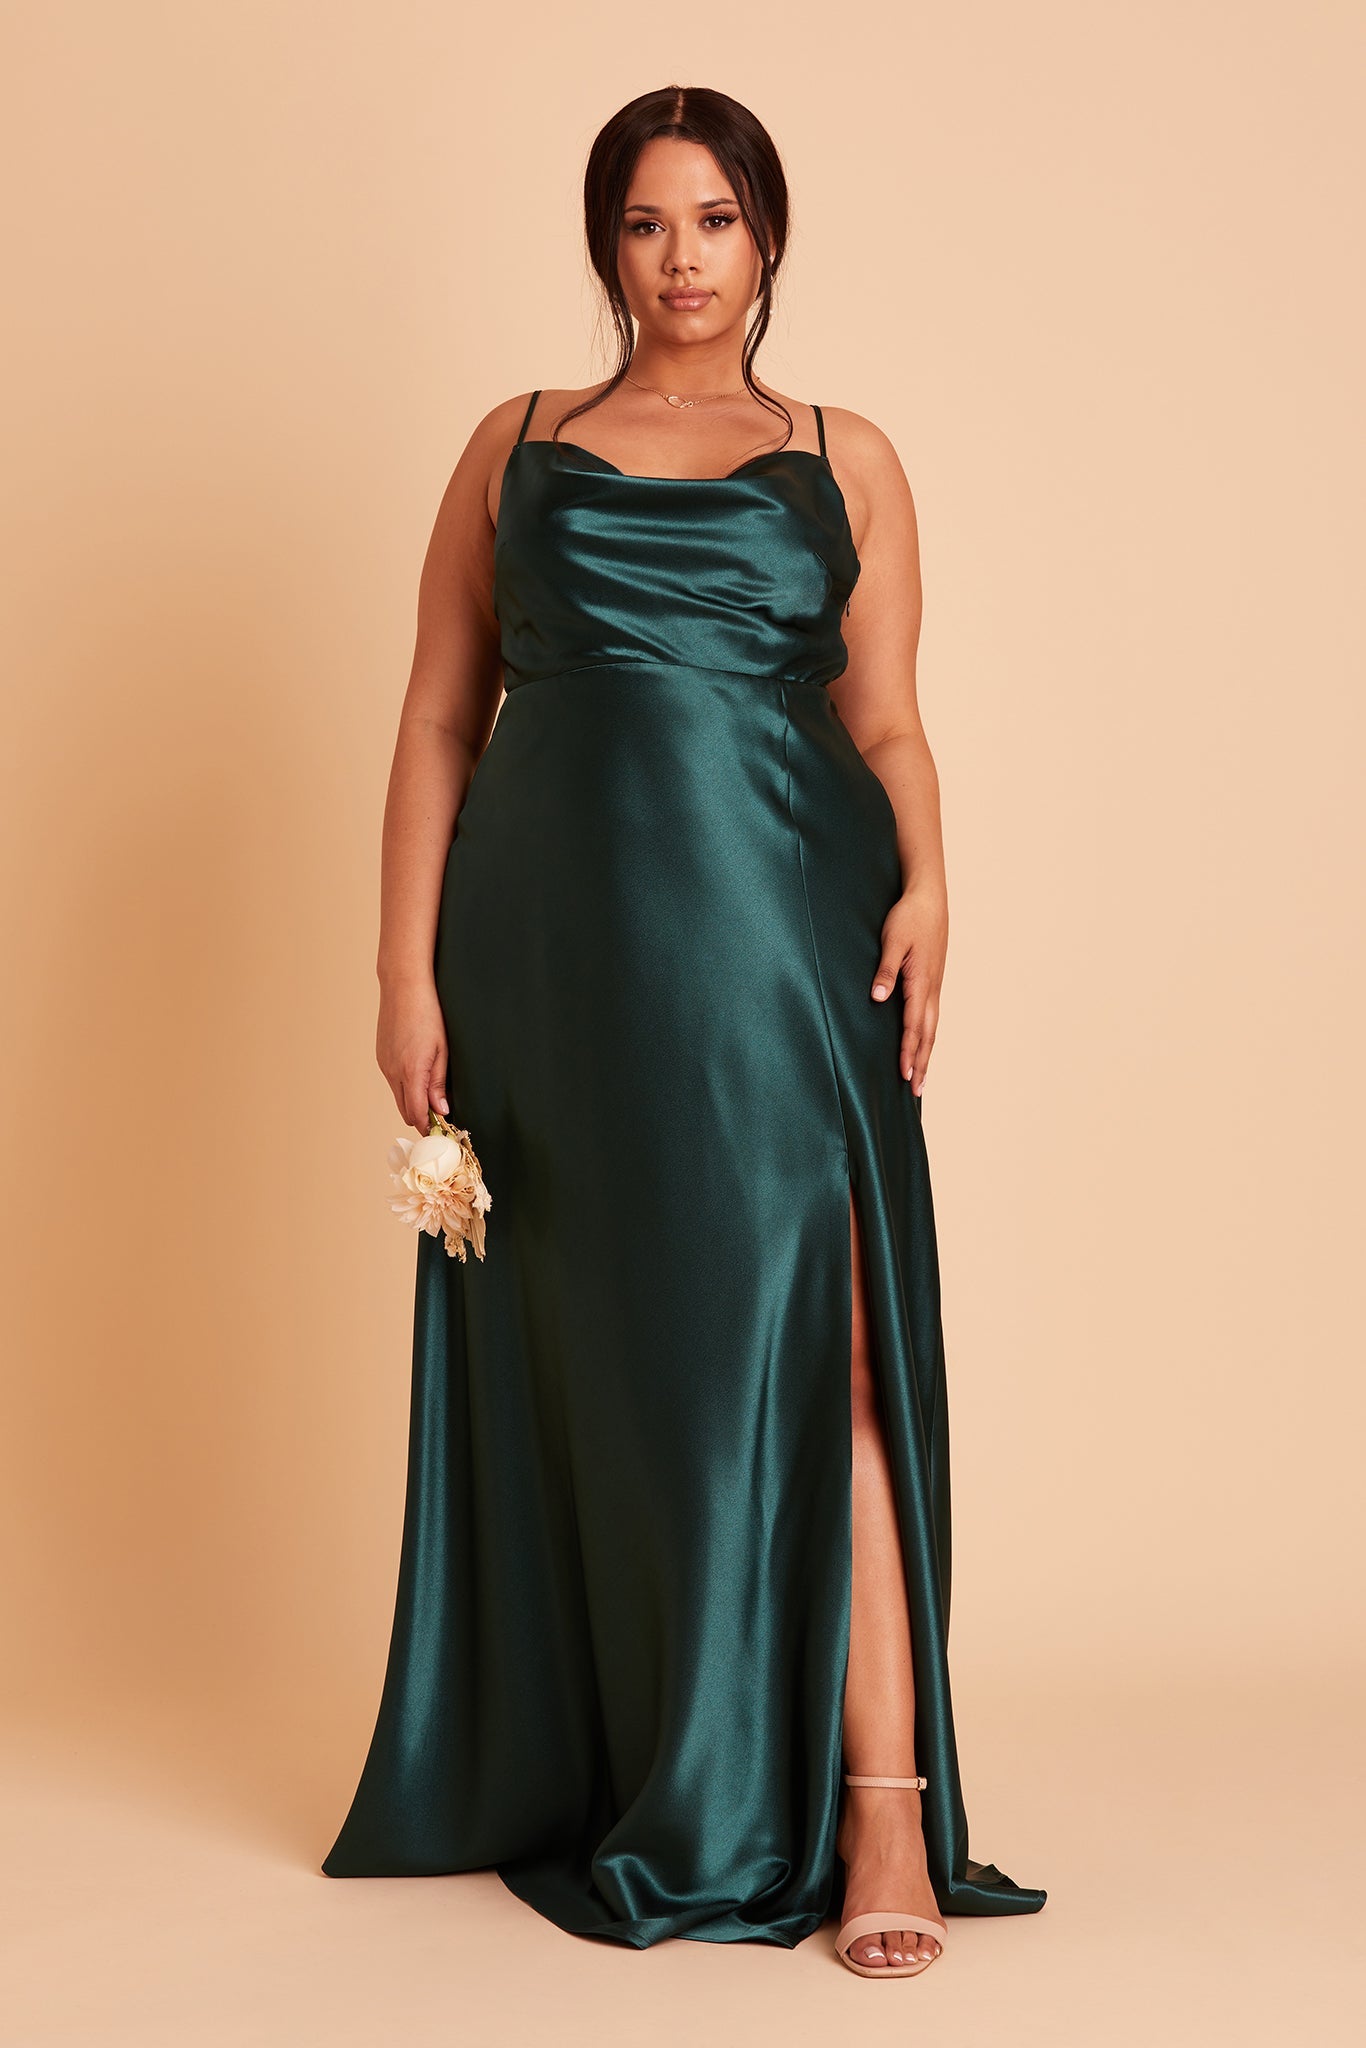 Front view of the Lisa Long Dress Curve in emerald satin shows a model revealing their leg and foot in the mid-thigh high slit. They wear the Natalie Chunky Heel shoe in nude blush.